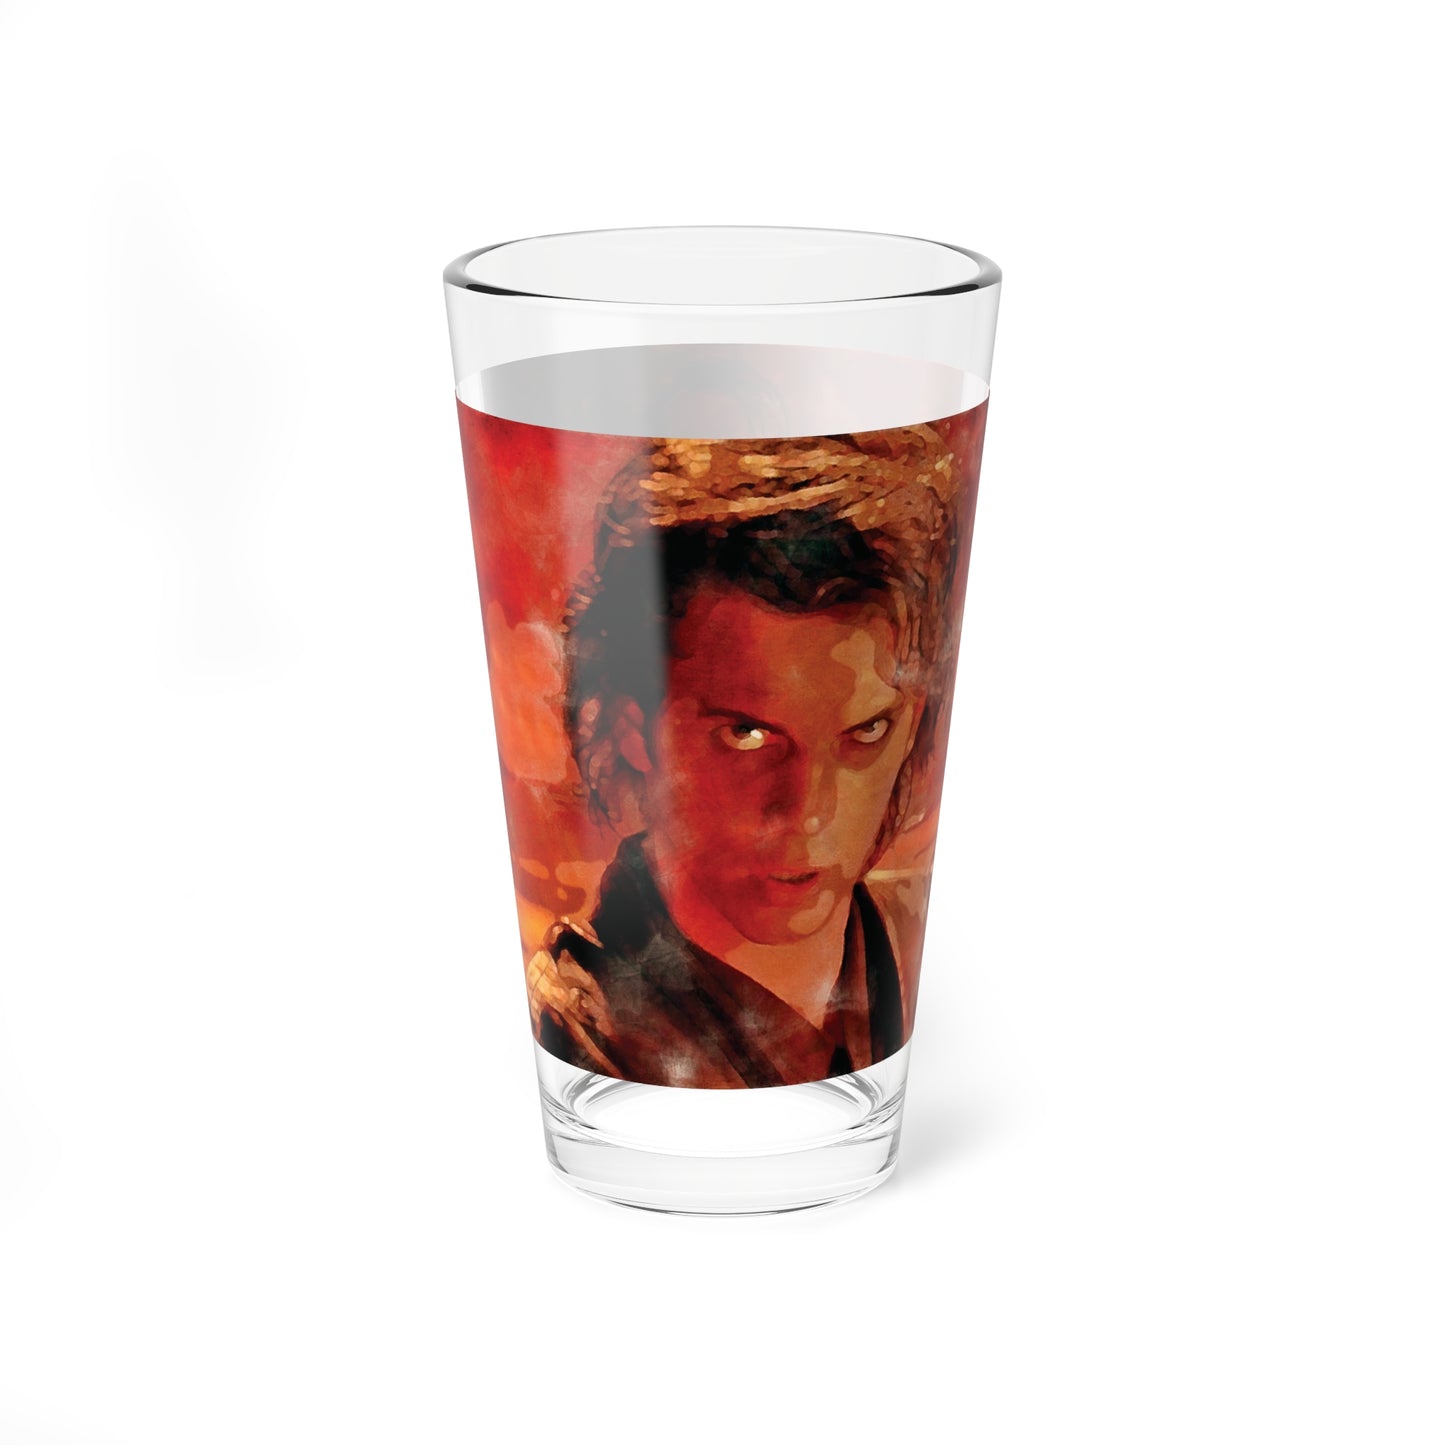 The High Ground - Star Wars Inspired Pint Glass - Drop #014